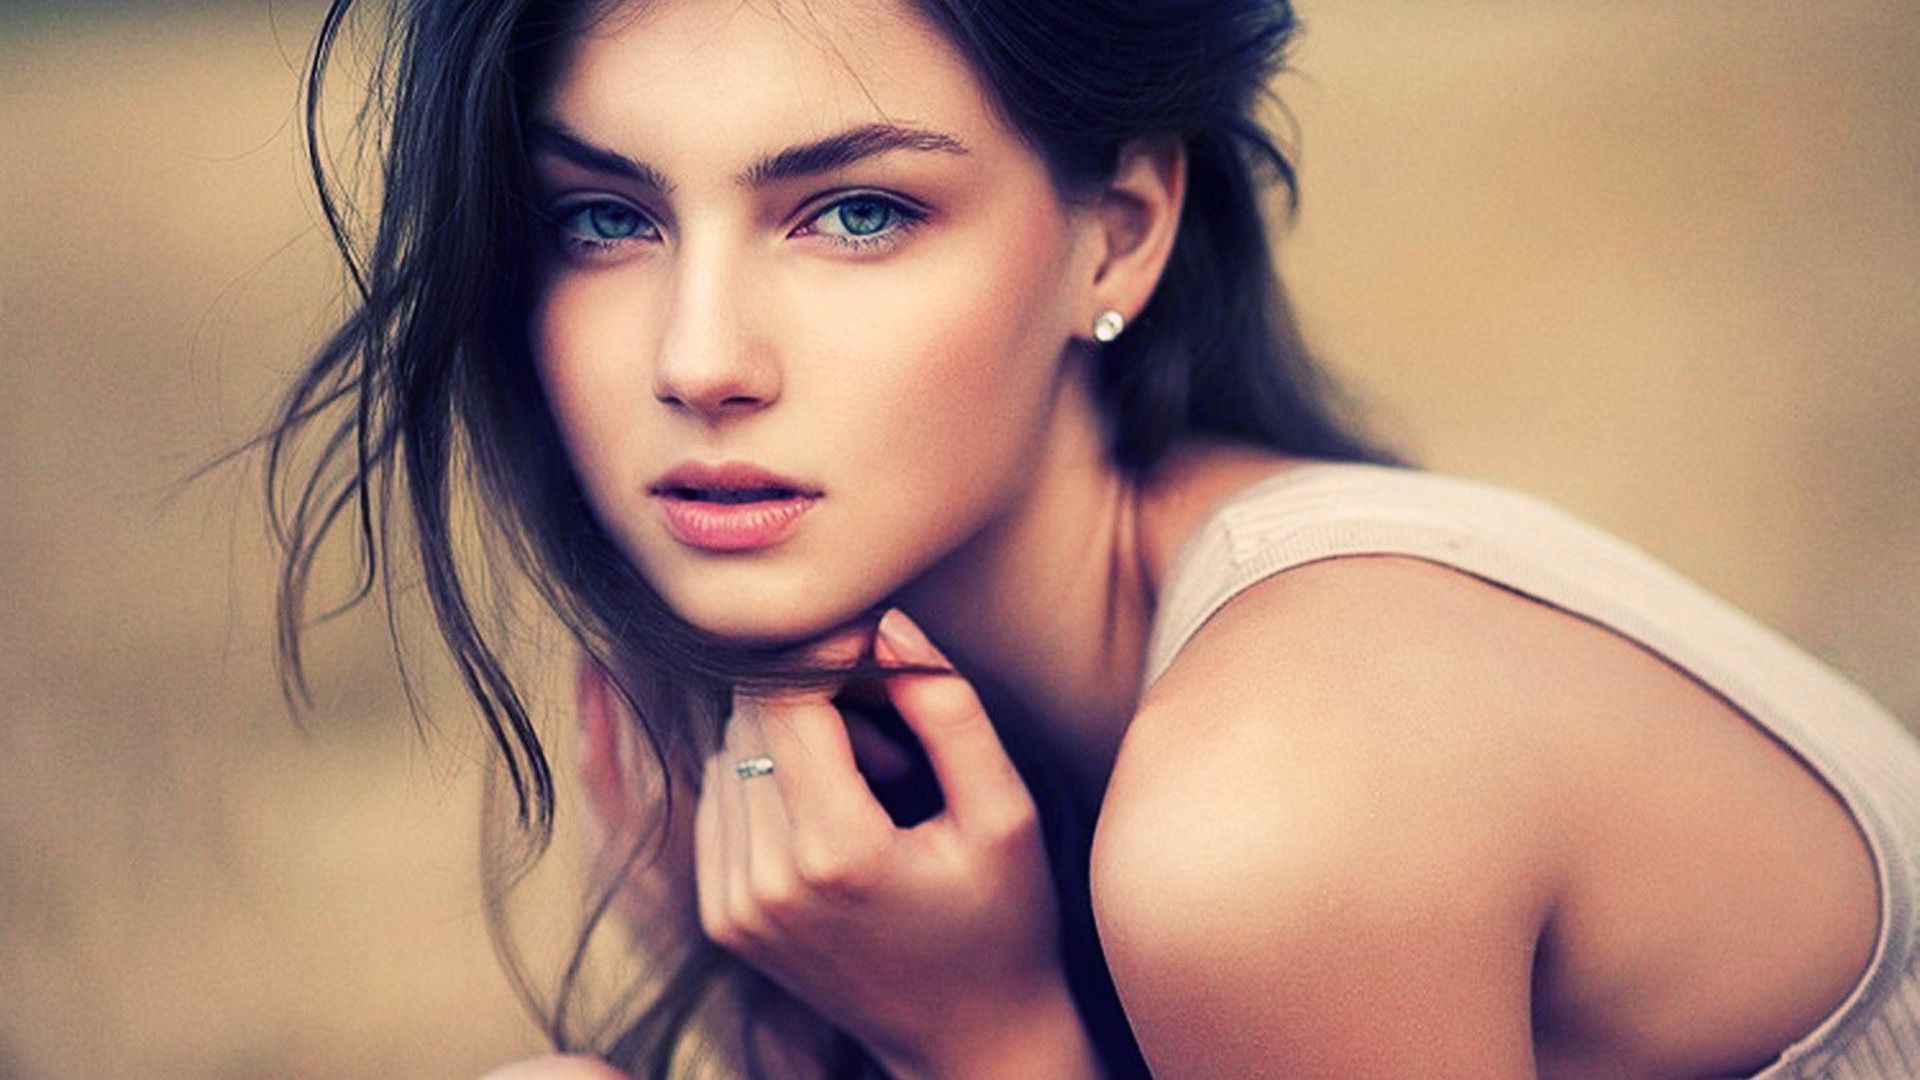 Blue Eyes Girls HD Wallpapers - , New Wallpapers, New Wallpapers